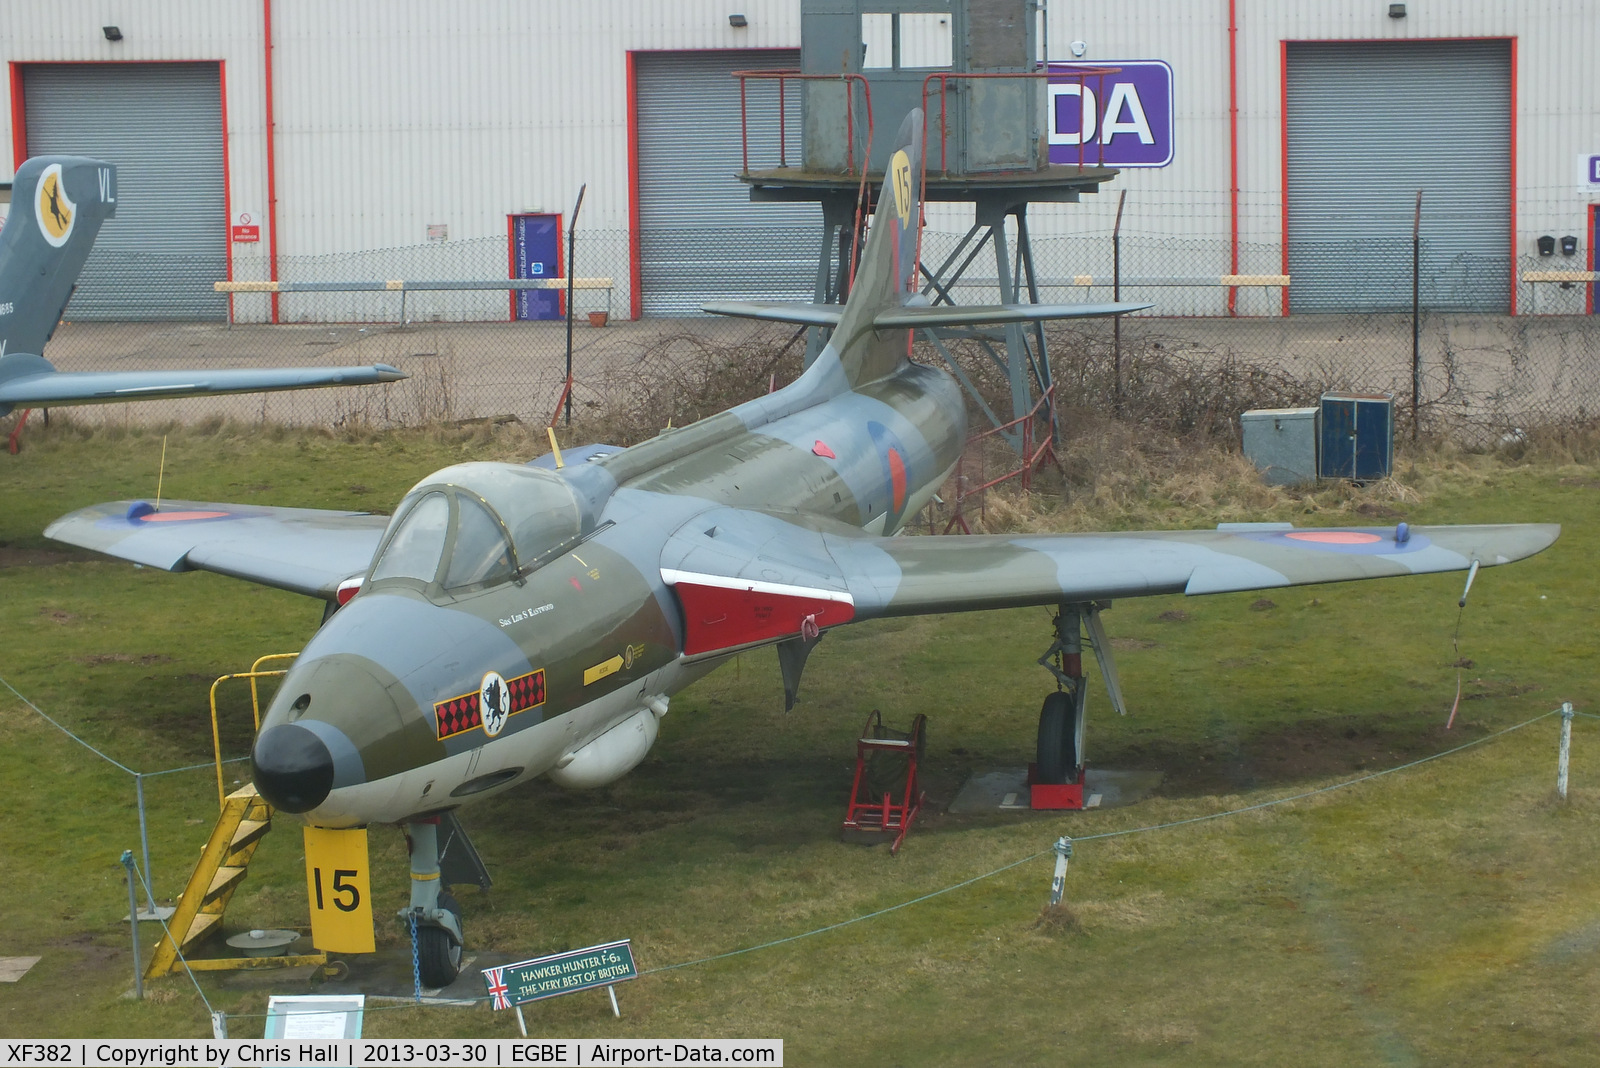 XF382, 1956 Hawker Hunter F.6A C/N S4/U/3282, preserved at the Midland Air Museum